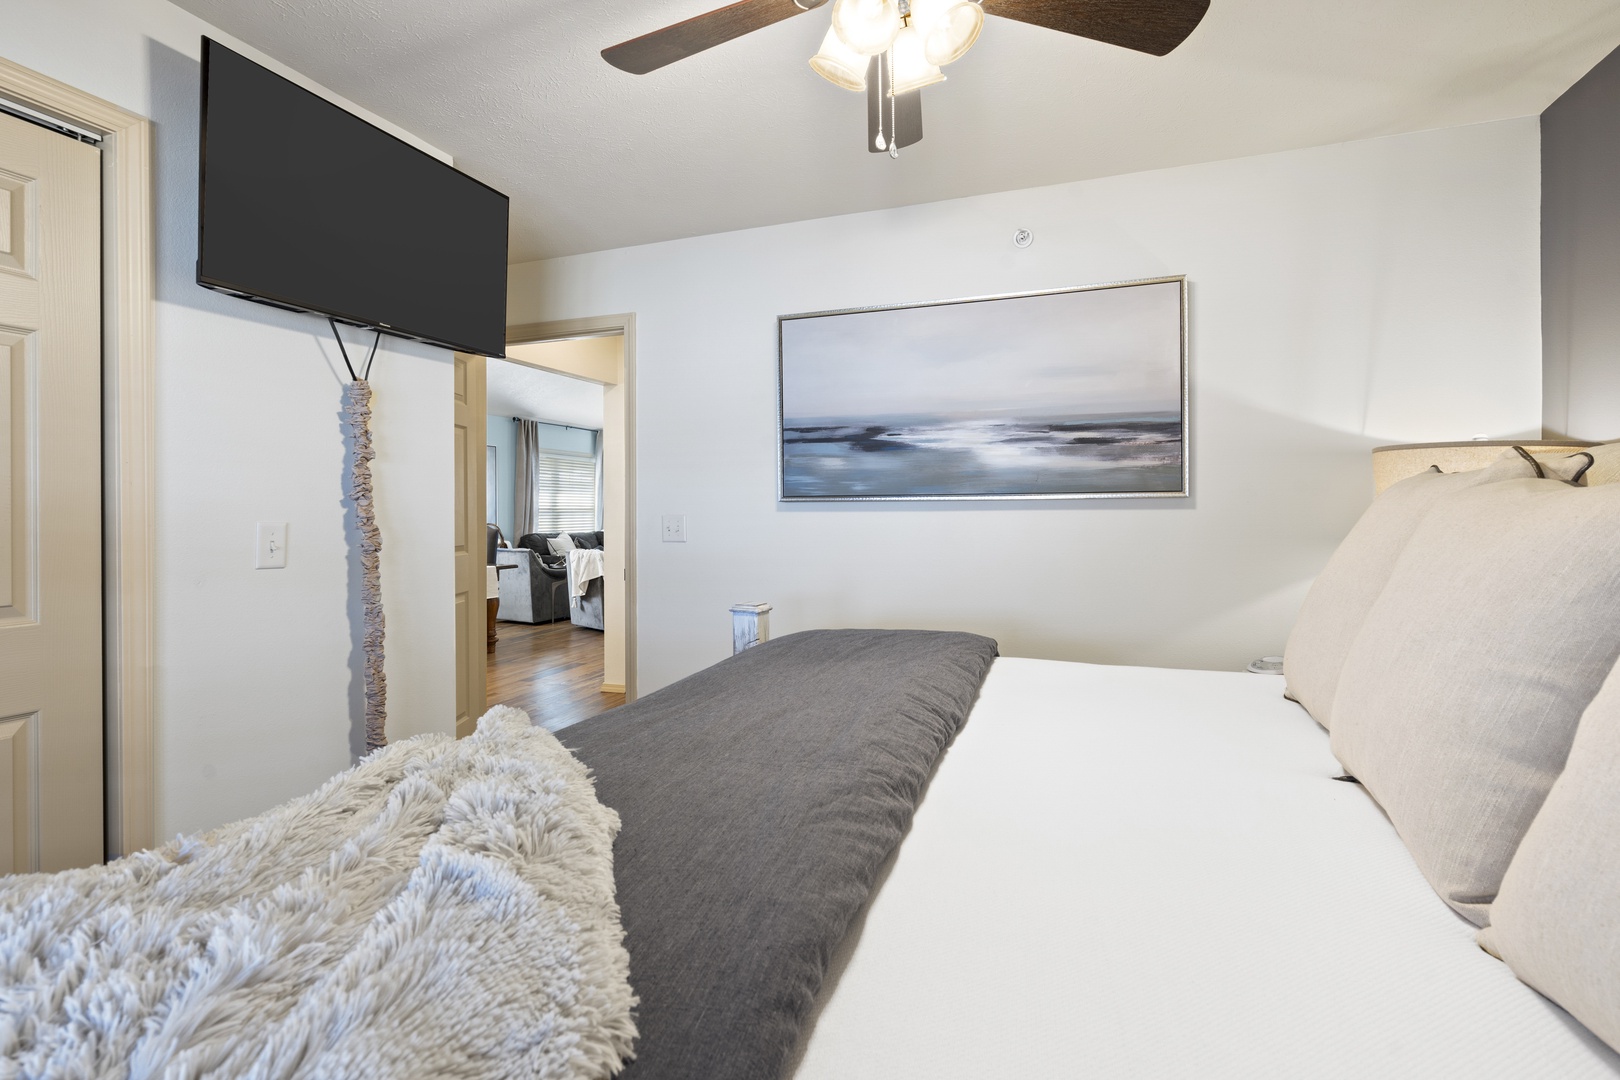 The first chic bedroom retreat boasts a plush king bed & Smart TV